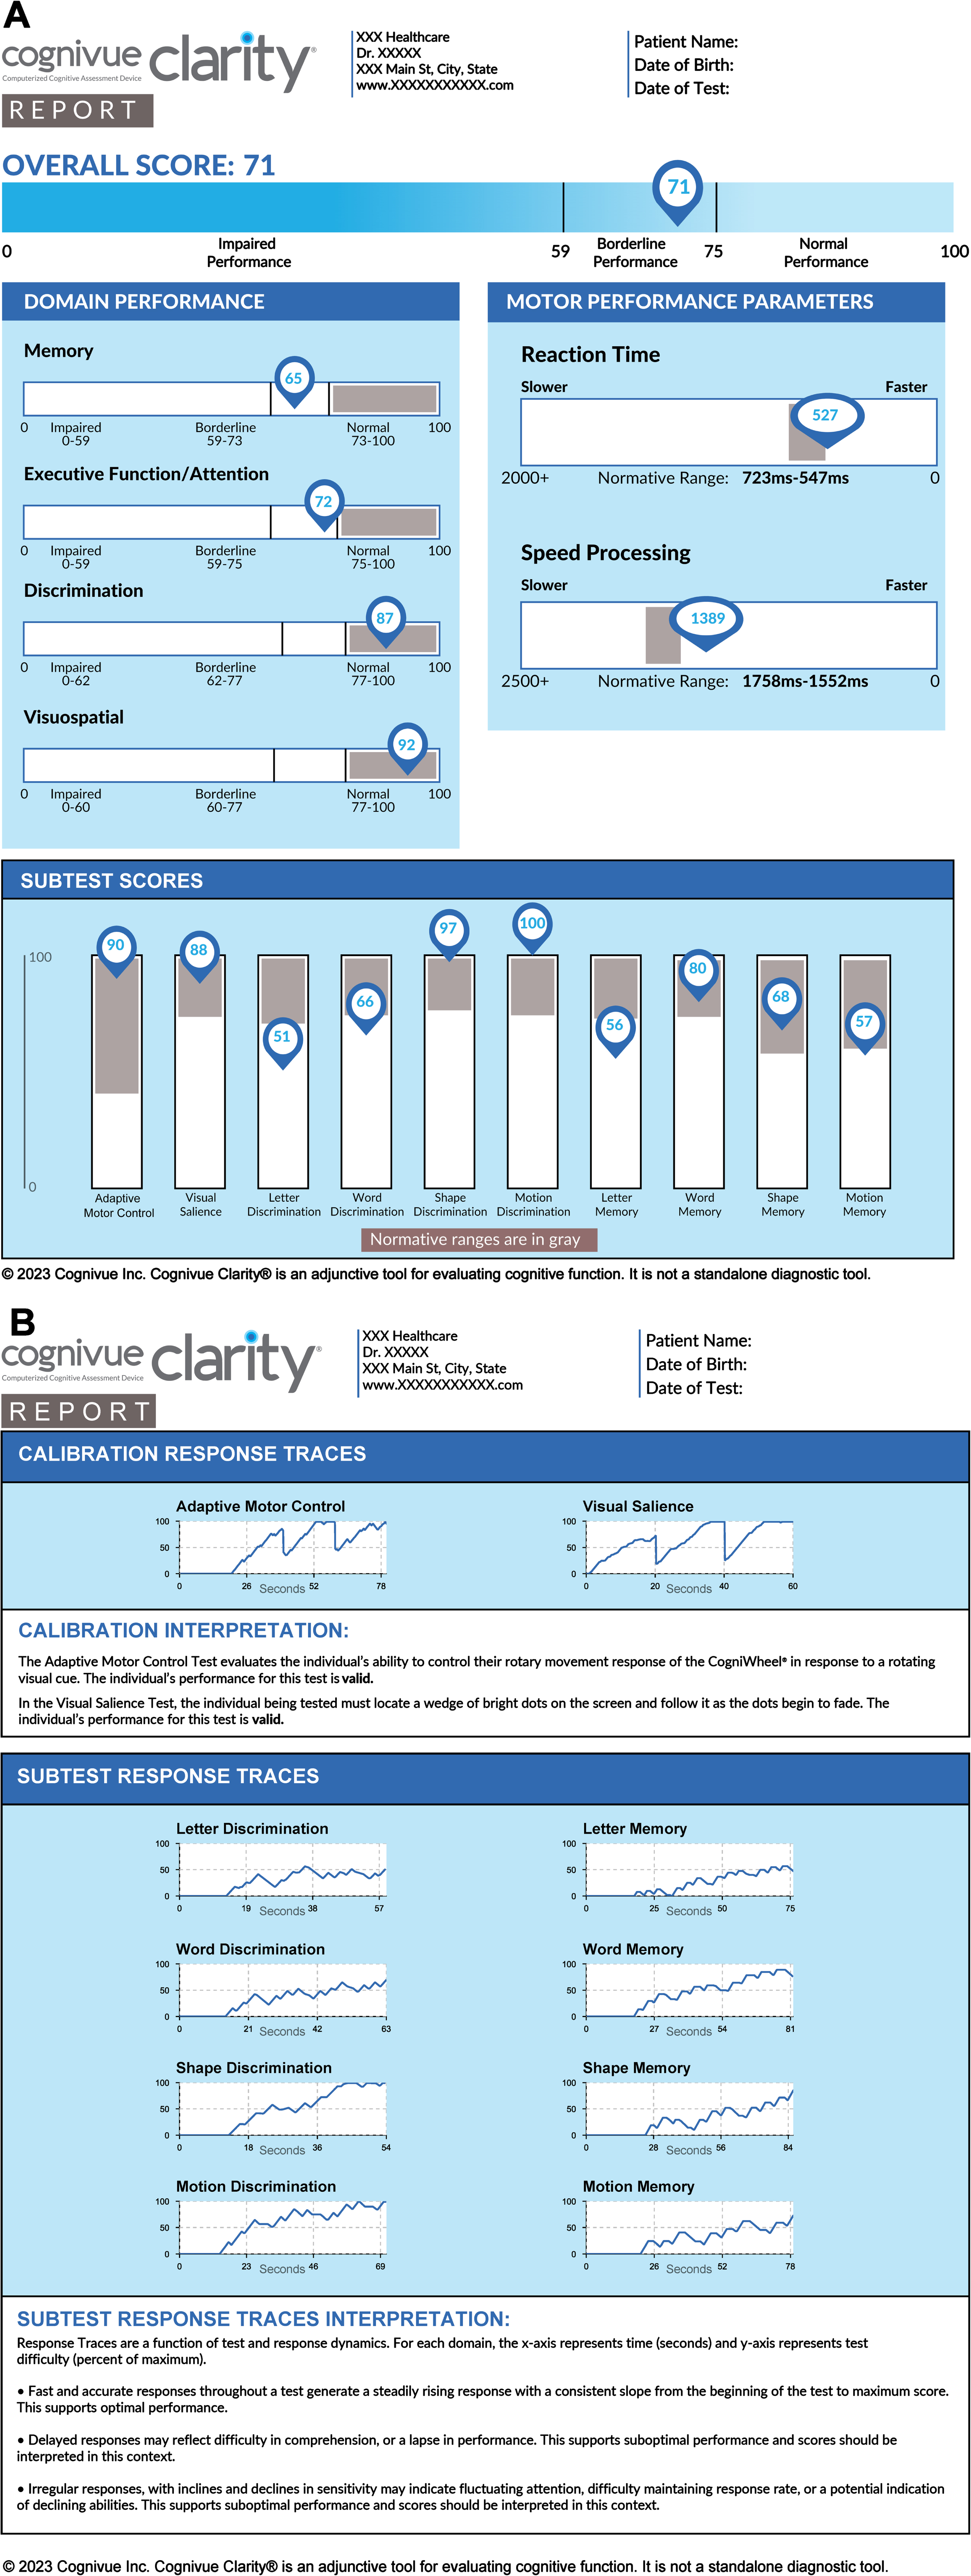 A sample report generated by Cognivue Clarity. Panel A demonstrates the scores derived from Cognivue Clarity including a global performance, 4 domains, 10 subtests, and 2 reaction time measurements. Panel B demonstrates the calibration and subtest response tracings as well as the interpretation of those tracings.